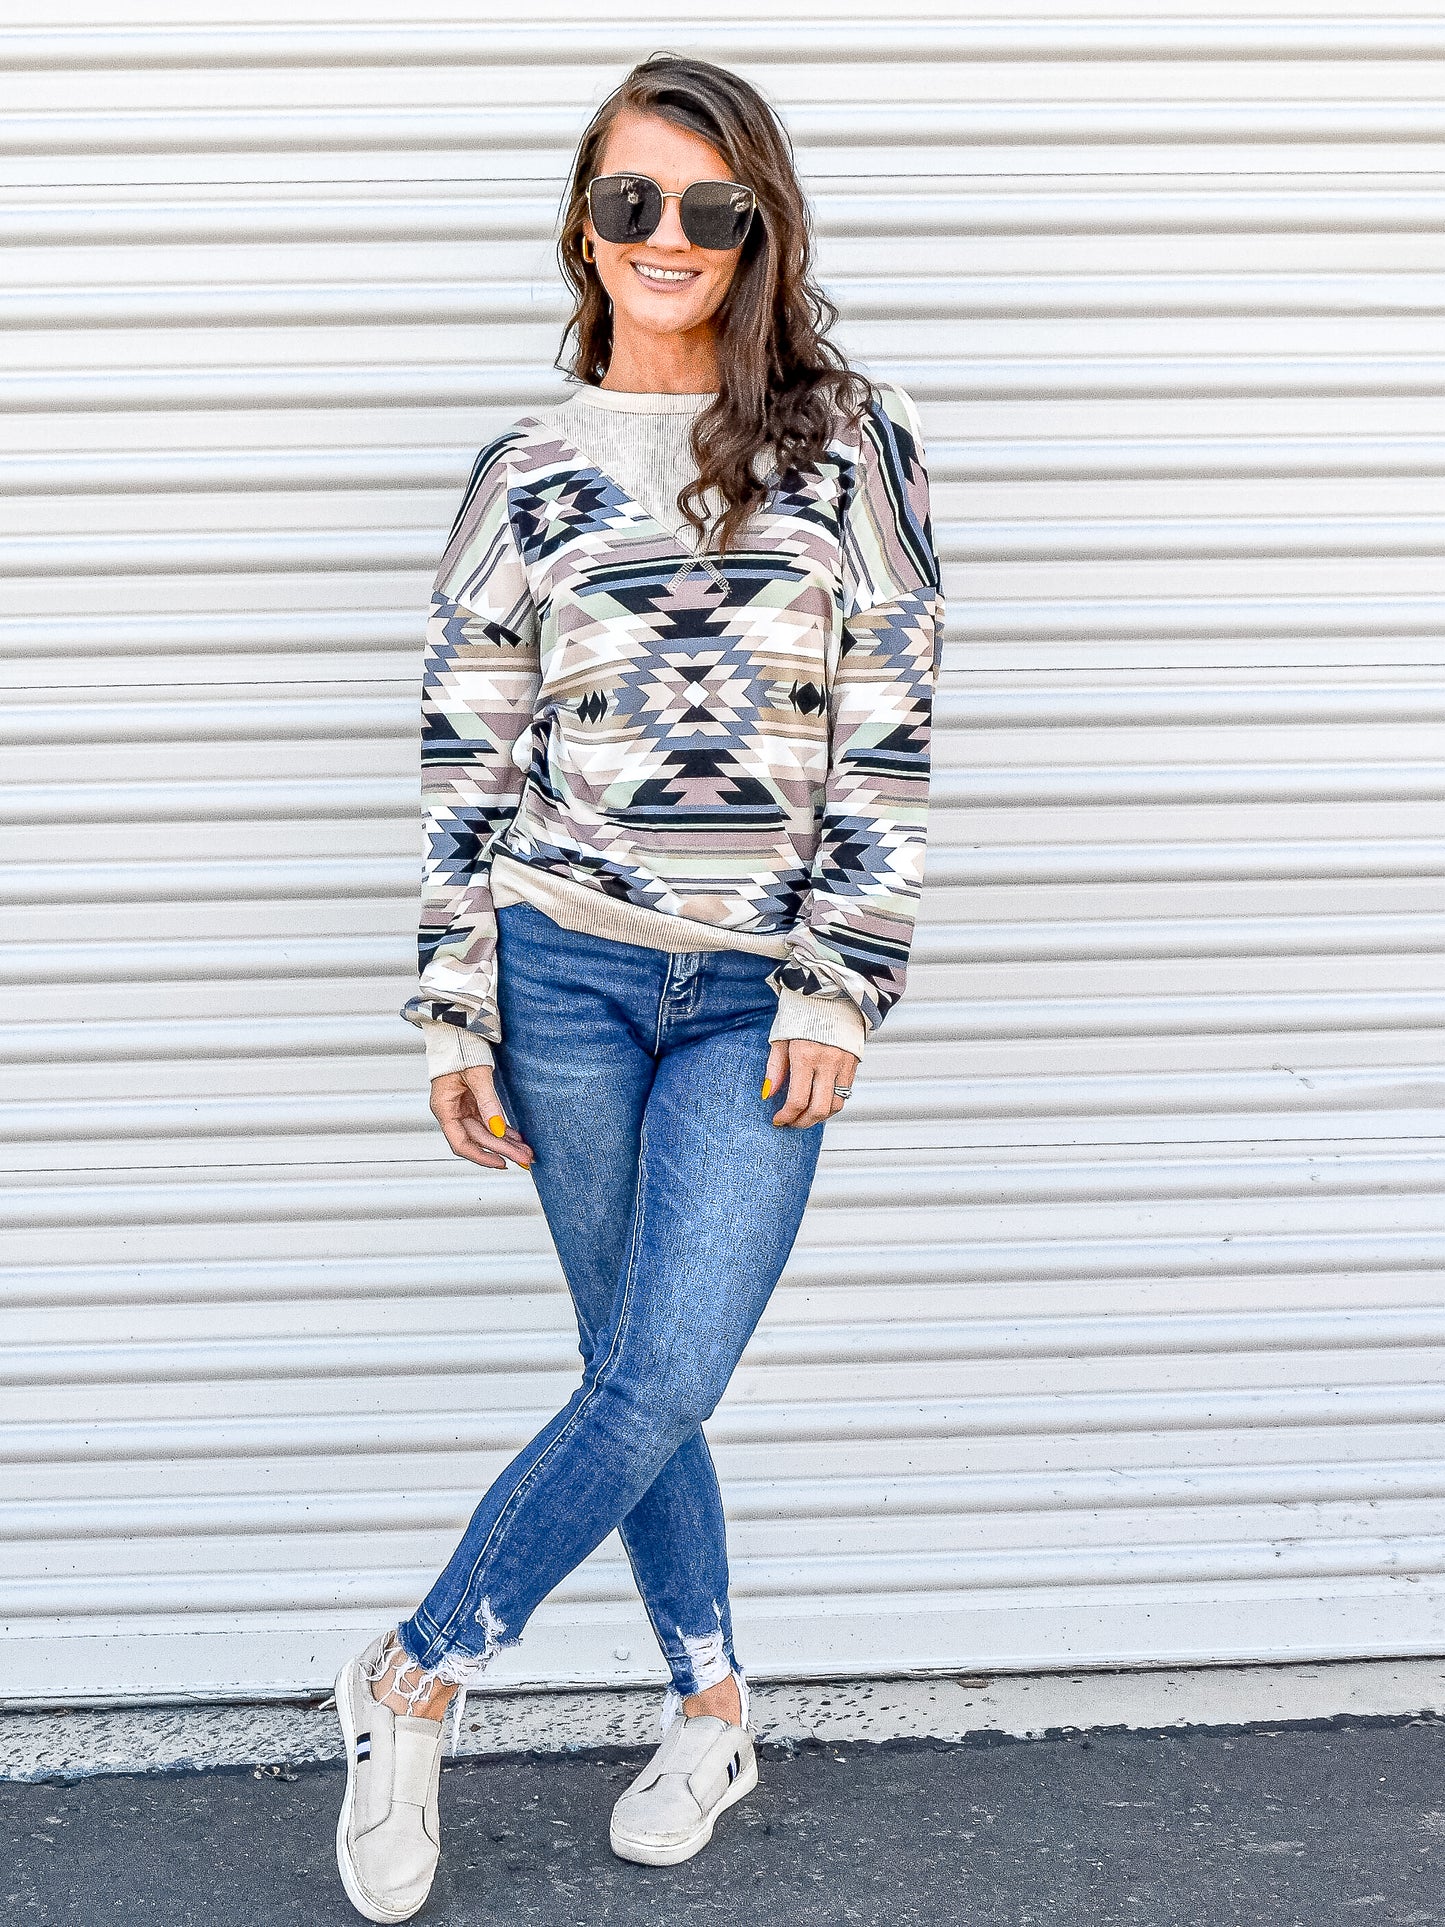 Aztec long sleep top styled casually with jeans and walking shoes